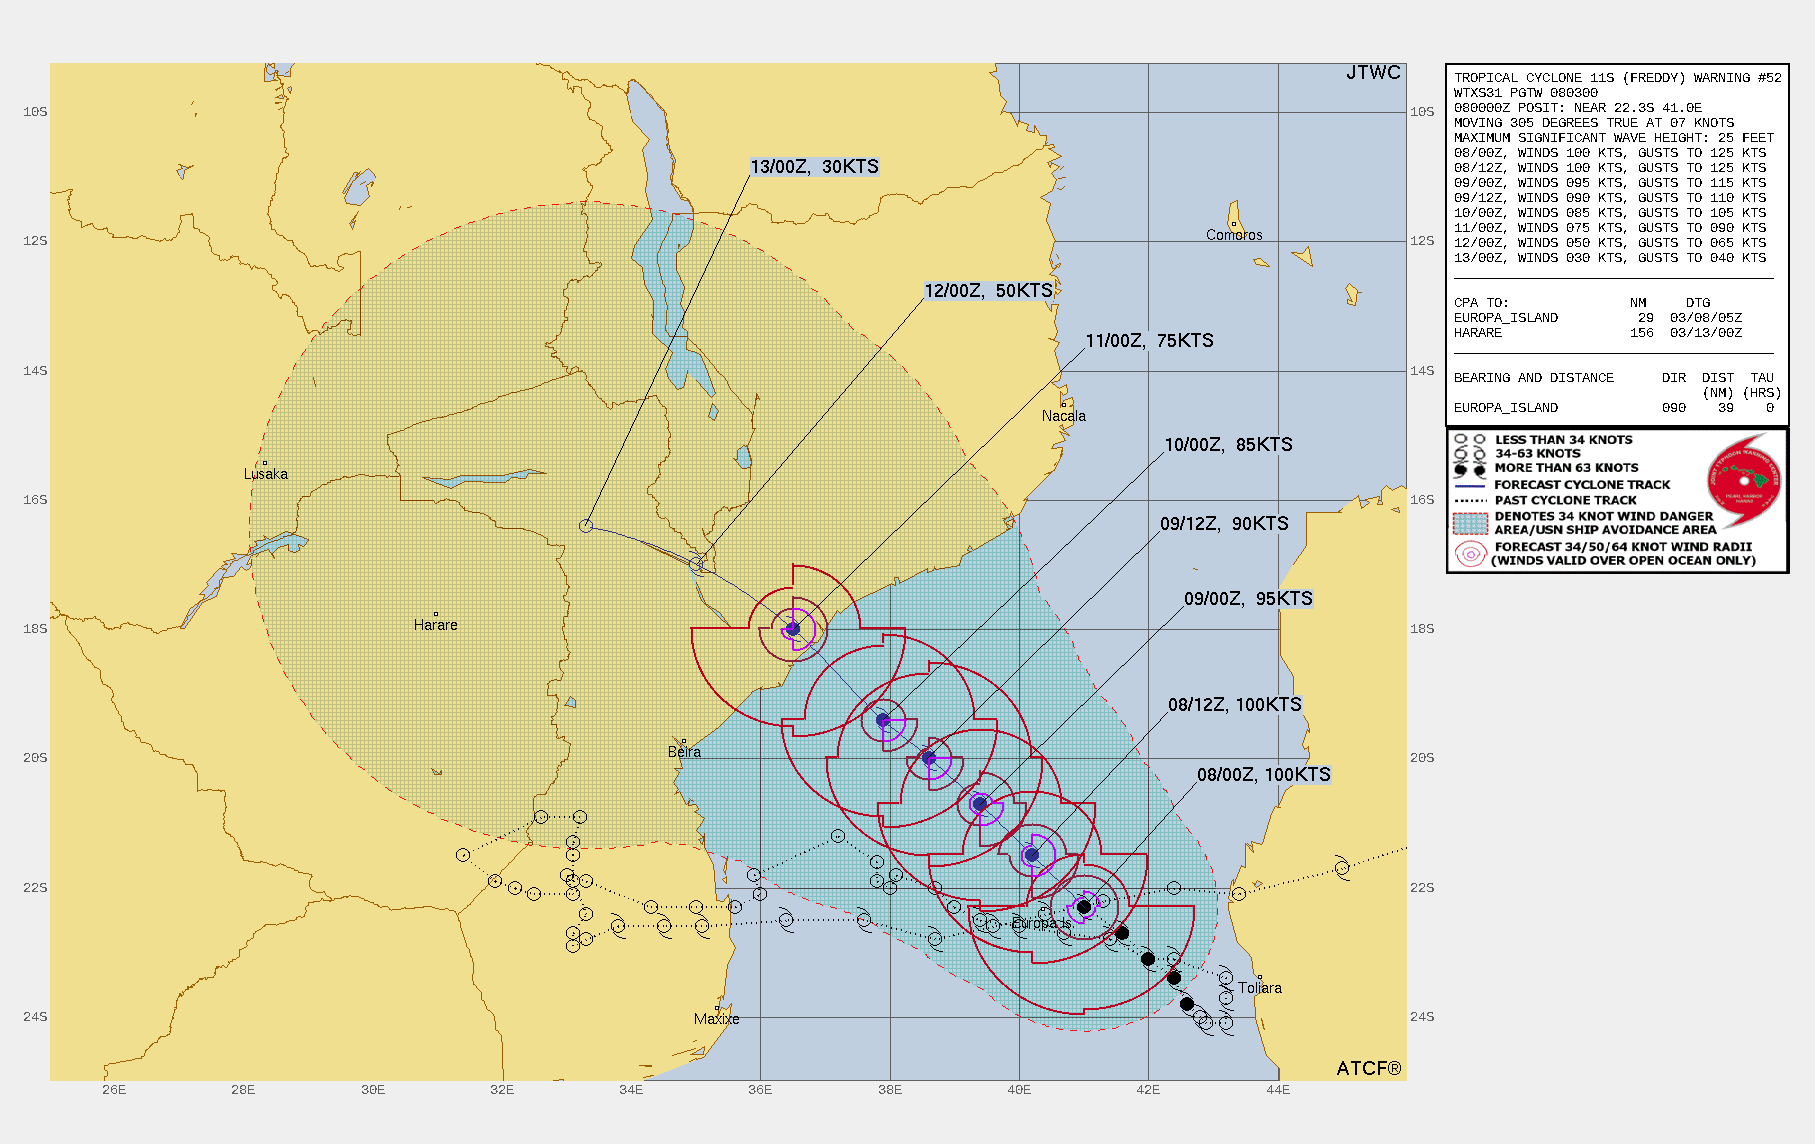 FORECAST REASONING.  SIGNIFICANT FORECAST CHANGES: THERE ARE NO SIGNIFICANT CHANGES TO THE FORECAST FROM THE PREVIOUS WARNING.  FORECAST DISCUSSION: TC 11S IS EXPECTED TO TRACK NORTHWESTWARD ALONG THE NORTHEASTERN PERIPHERY OF THE STR THROUGH TAU 72. THE SYSTEM WILL MAKE LANDFALL OVER MOZAMBIQUE NEAR TAU 72 AND IS THEN FORECAST TO SLOW AND TURN WEST-NORTHWESTWARD WITH POSSIBLE QUASI-STATIONARY MOTION DUE TO COMPETING STEERING INFLUENCES. TC 11S IS FORECAST TO GRADUALLY WEAKEN THROUGH THE FORECAST PERIOD AS SST VALUES COOL SLIGHTLY. ADDITIONALLY, POLEWARD OUTFLOW SHOULD WEAKEN GRADUALLY AS THE SYSTEM TRACKS EQUATORWARD AWAY FROM THE SUBTROPICAL WESTERLIES WITH WEAK DIVERGENCE ALOFT ANTICIPATED AS THE SYSTEM APPROACHES THE COAST OF MOZAMBIQUE.